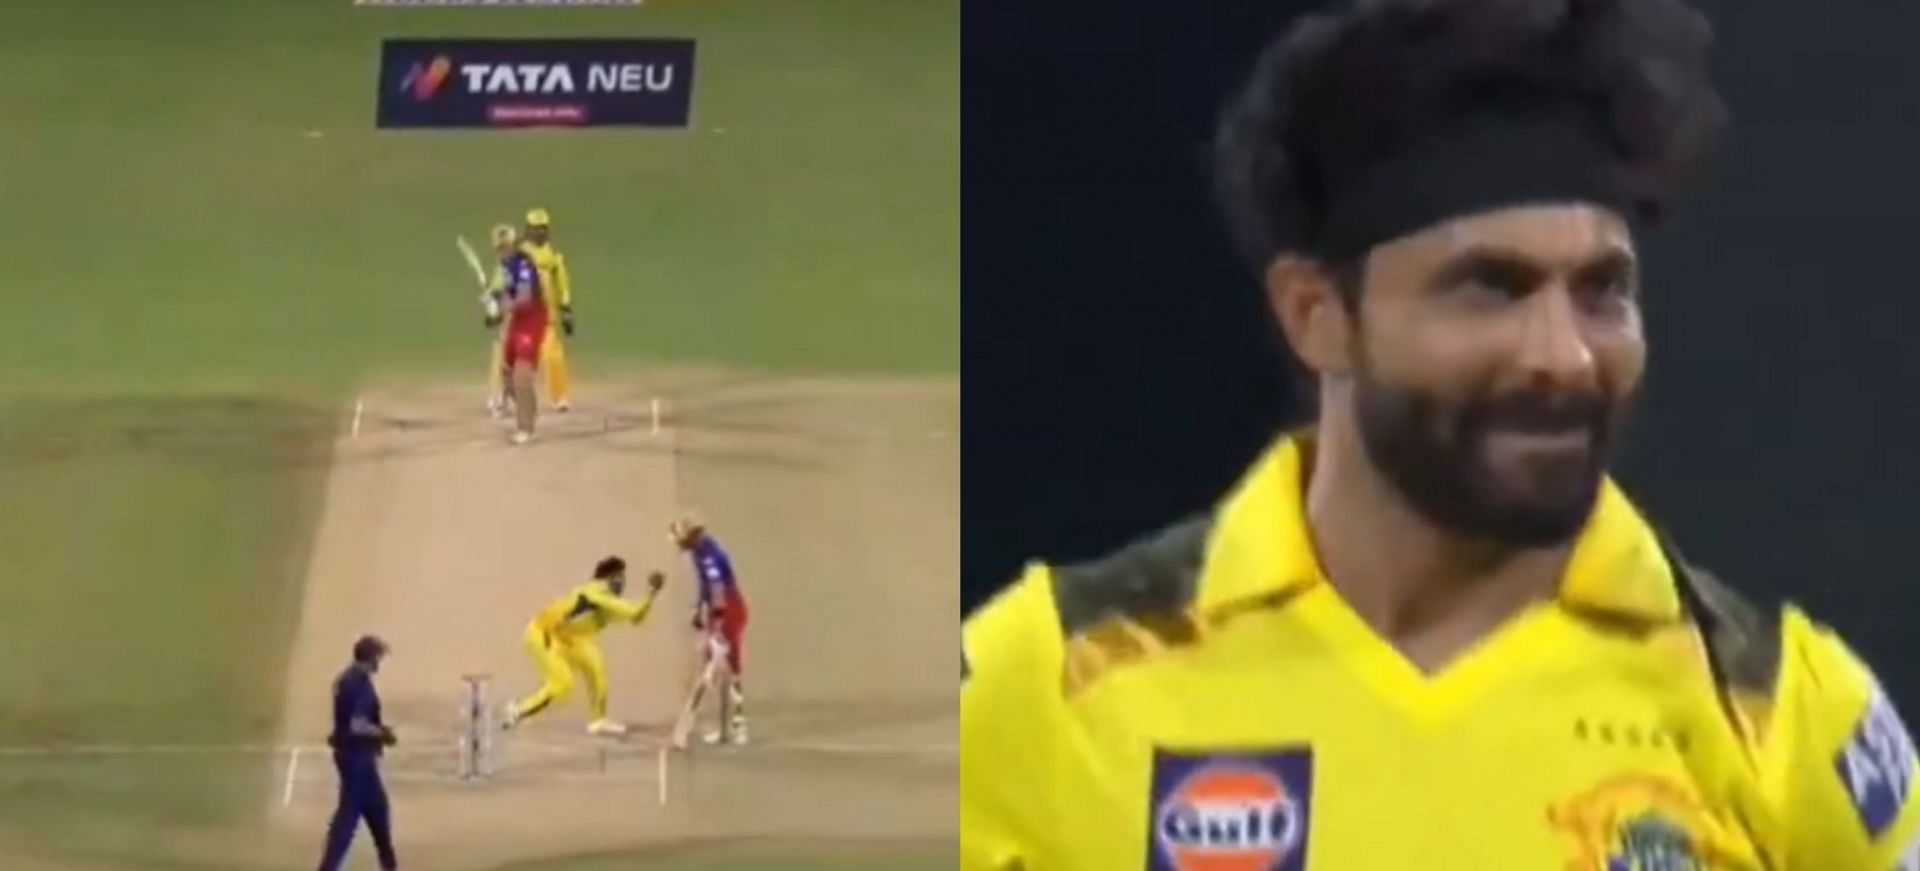 Virat Kohli had a hilarious conversation with Chennai Super Kings all-rounder Ravindra Jadeja during the eleventh over of the RCB